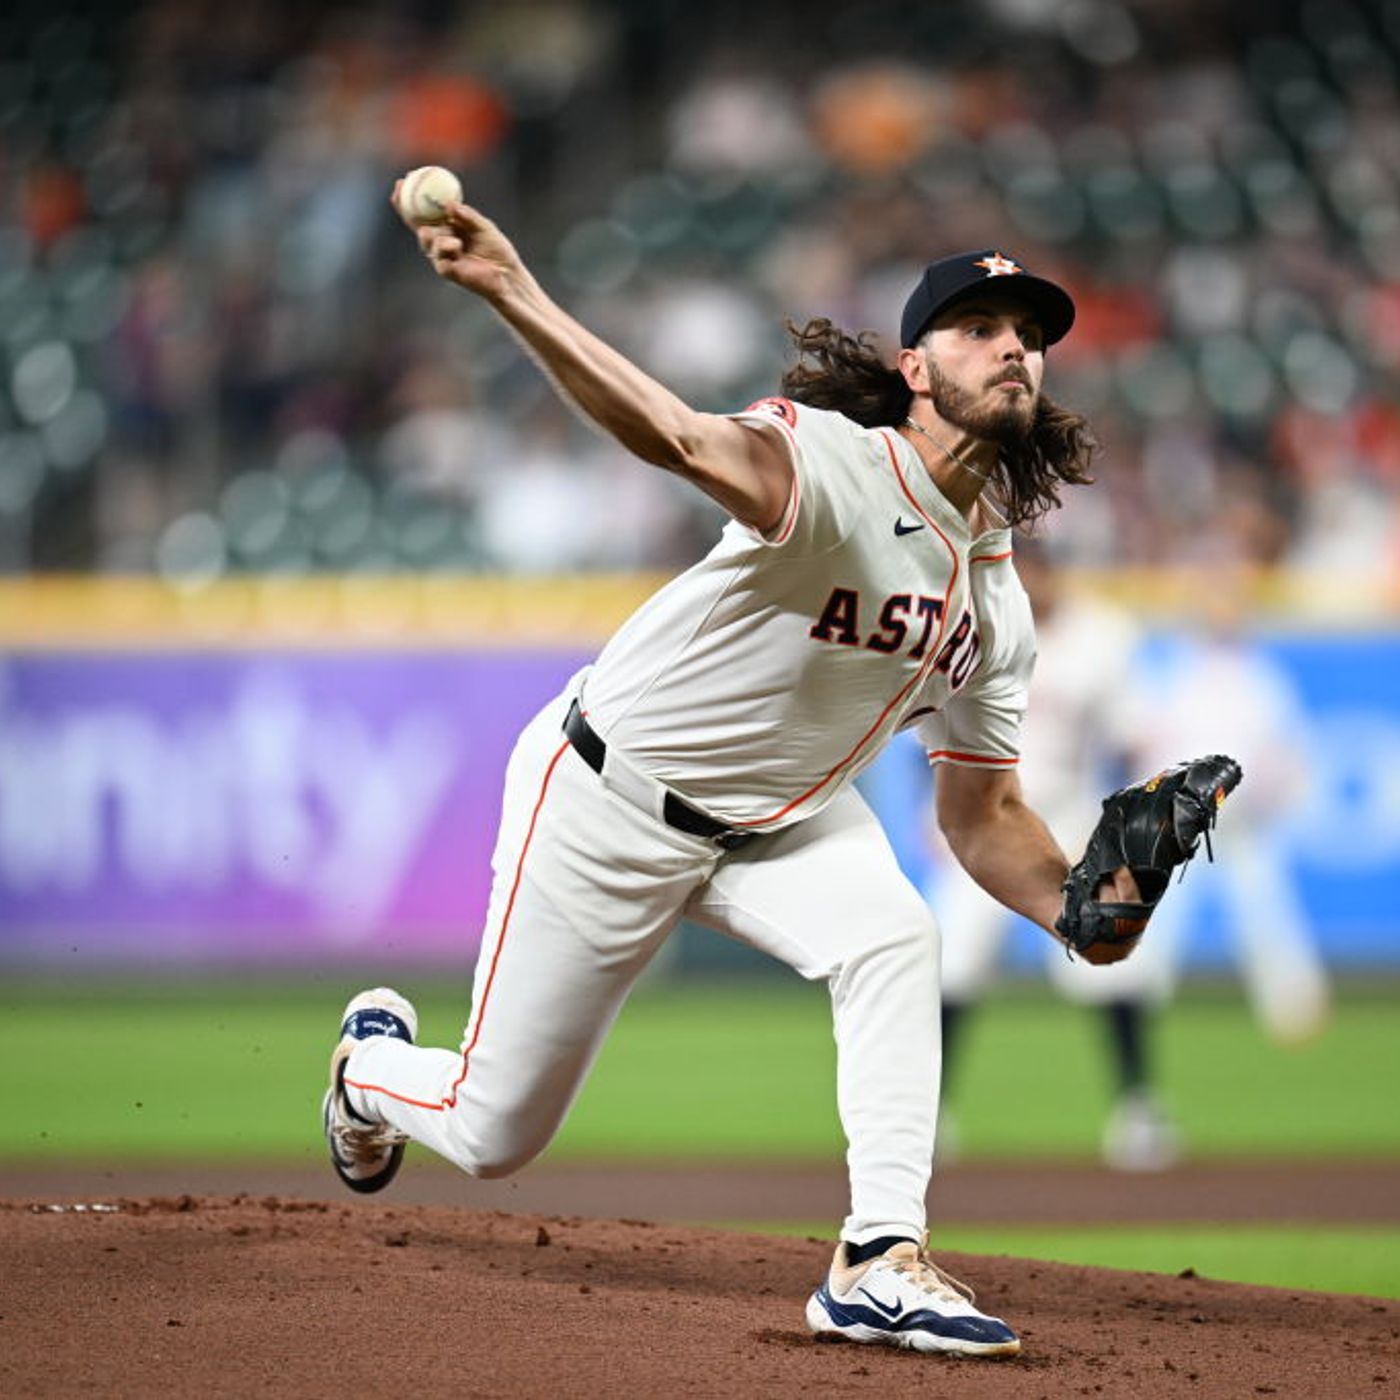 Astros Win Two Straight Series, Yordan And Bregman Struggle, Patrick Beverley Controversy